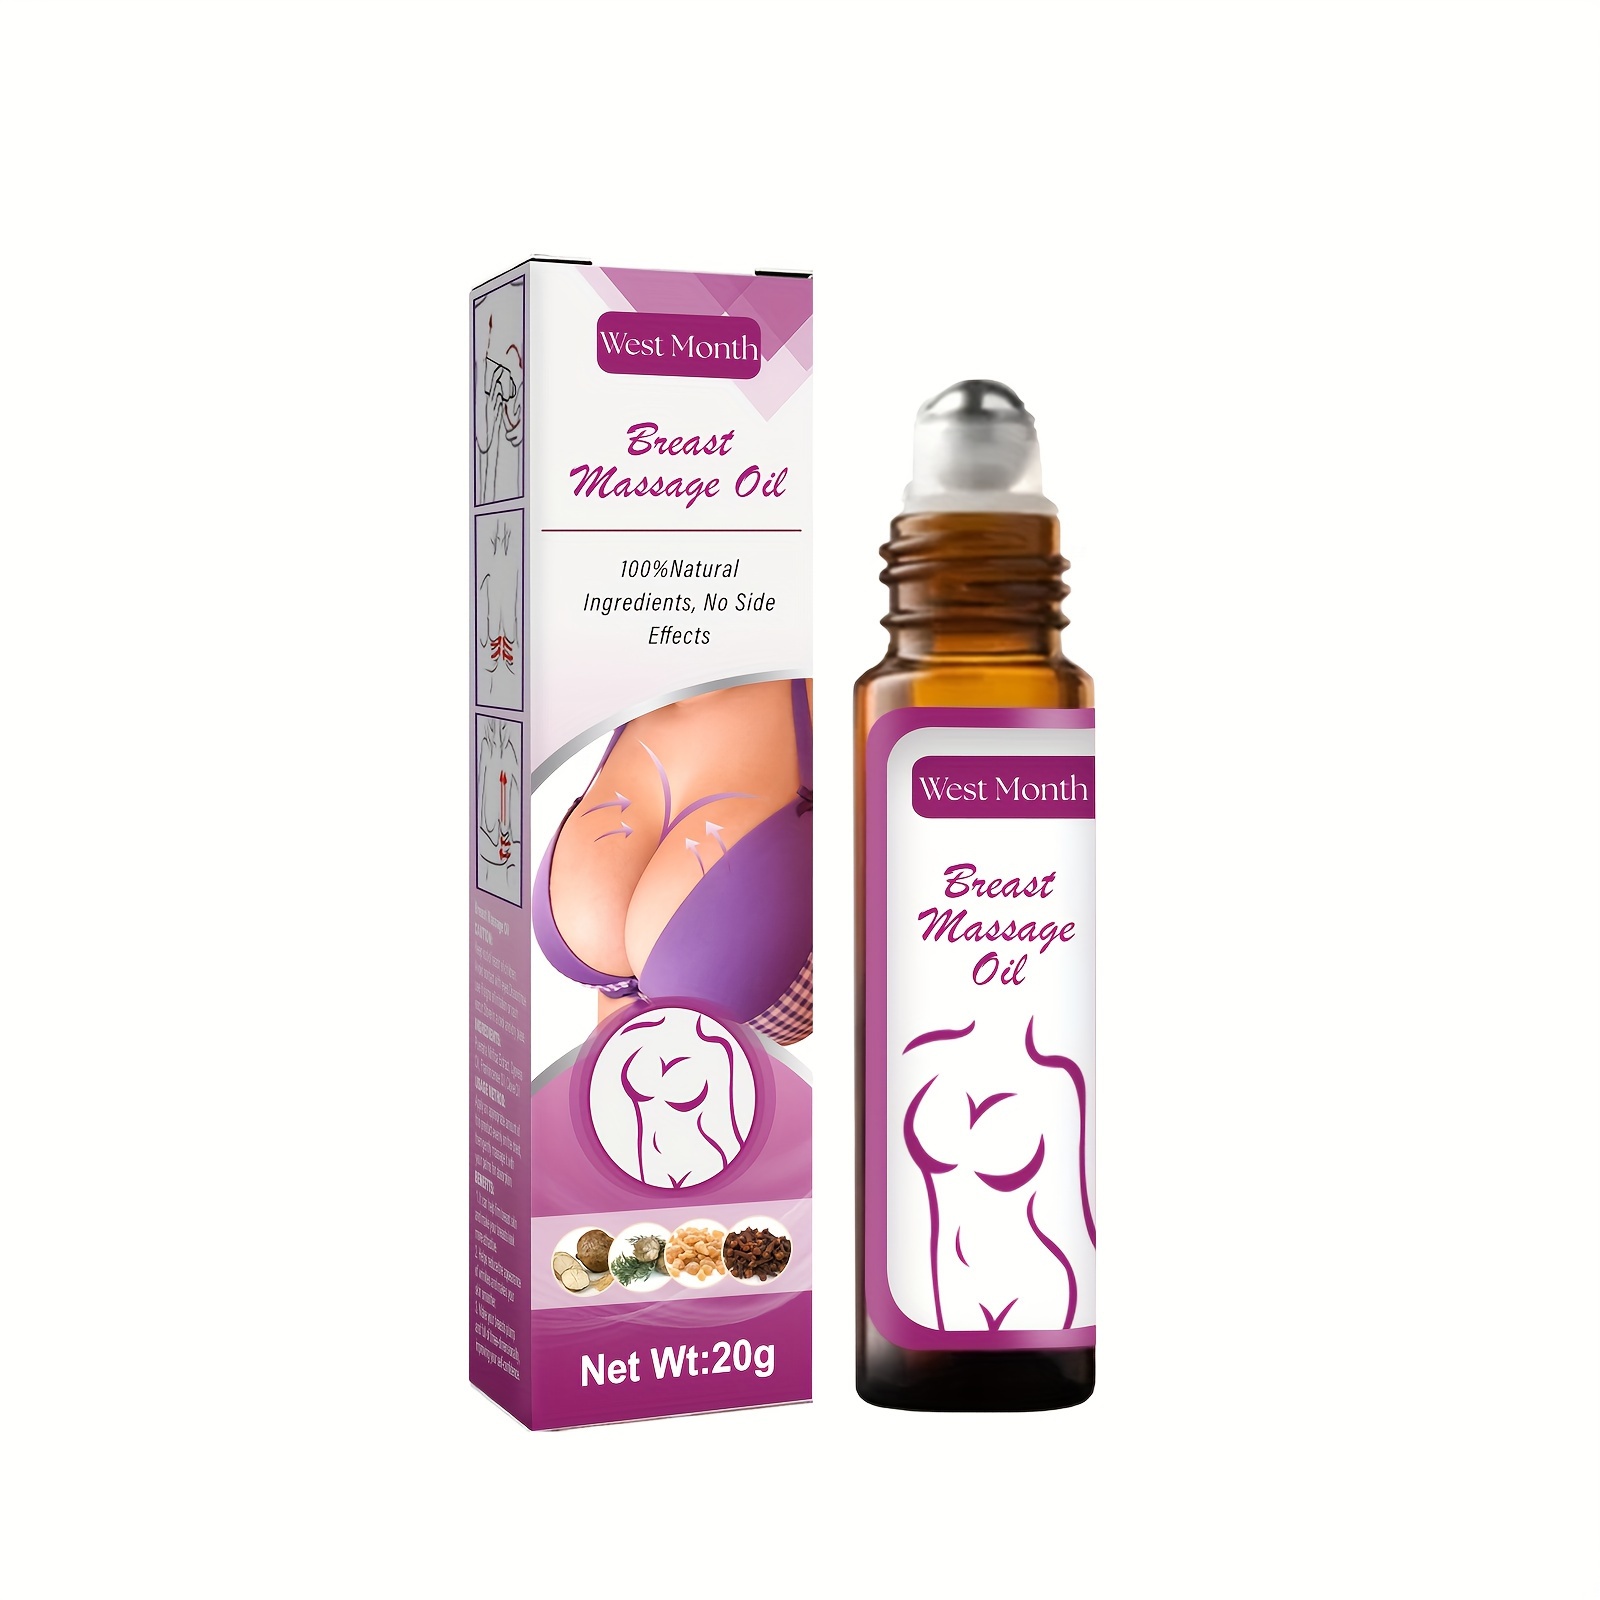 Breast Strengthening and Lifting Oil, 1 Oz Breast Oil Firming Breast  Enlarge Oil